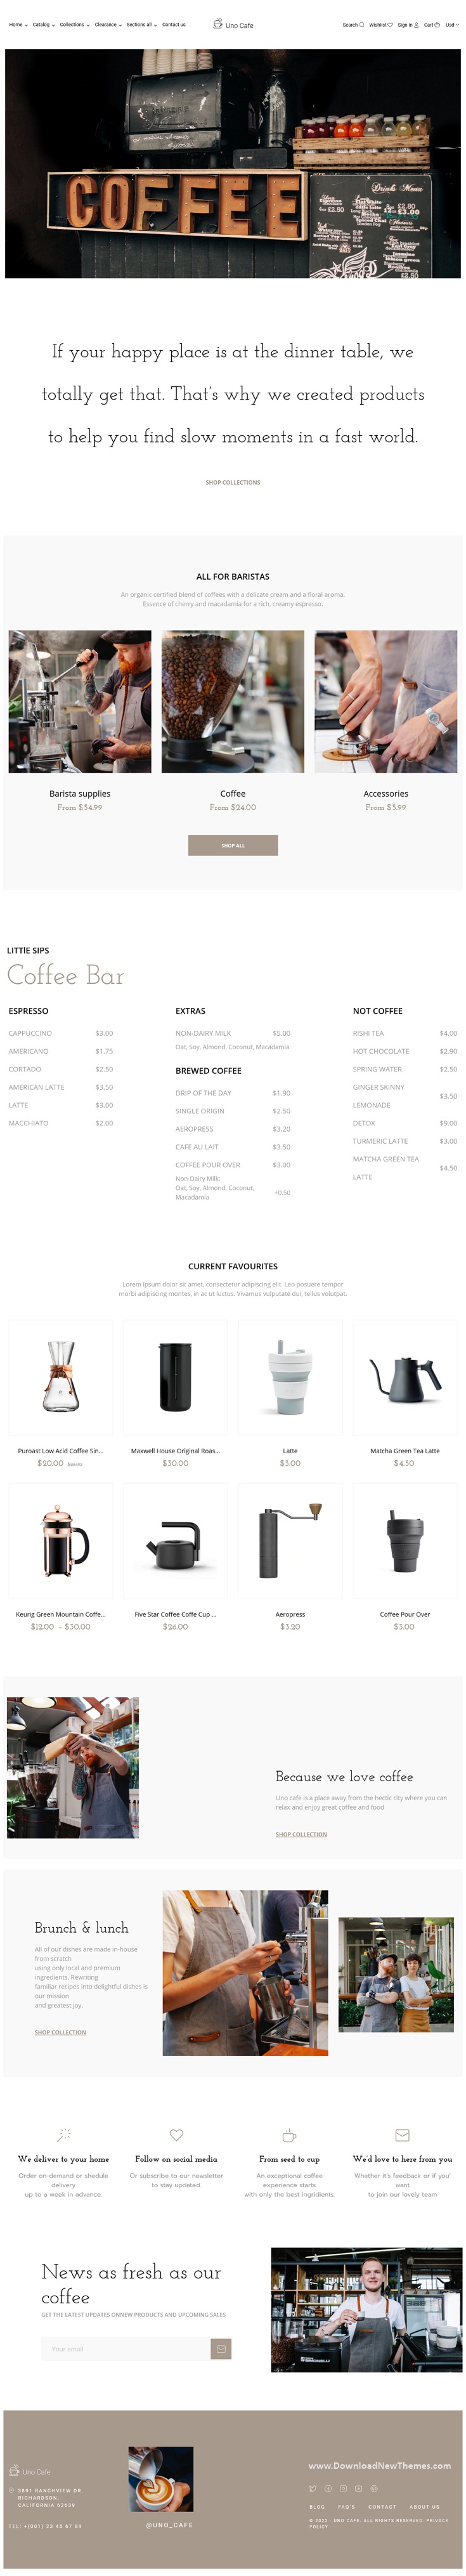 Uno Cafe - Coffee Shop Shopify Theme for Barista